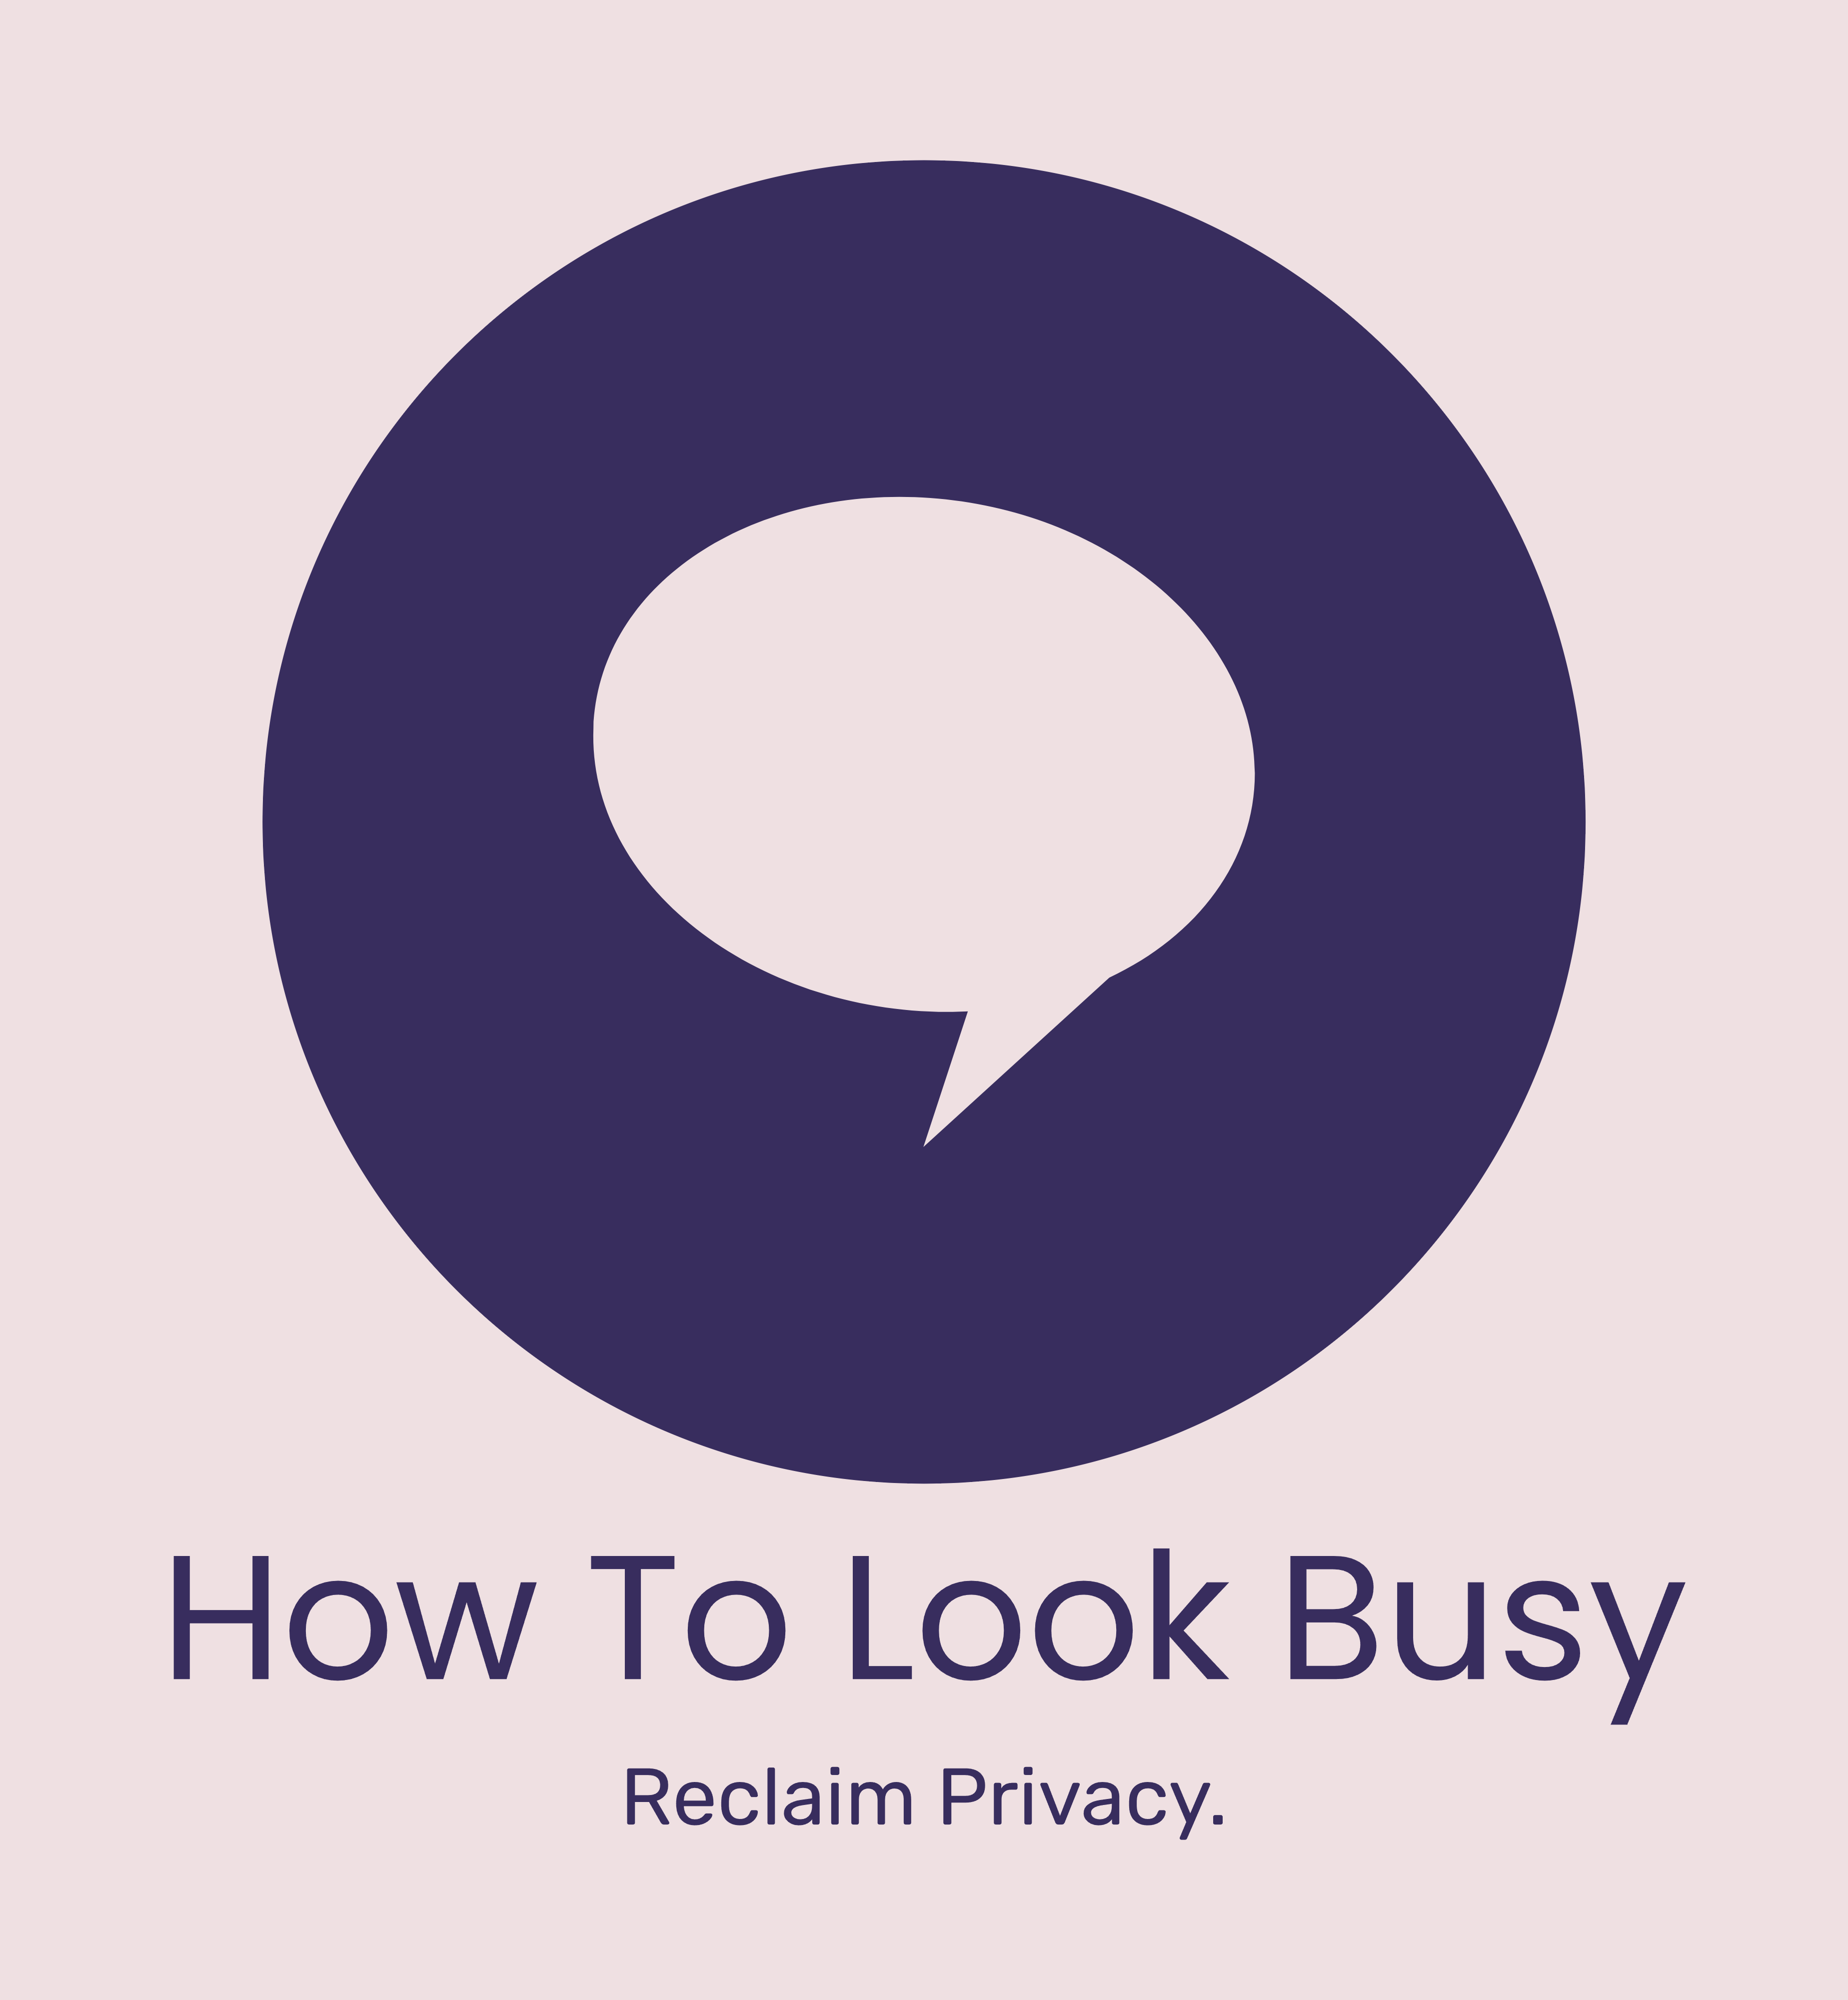 How To Look Busy